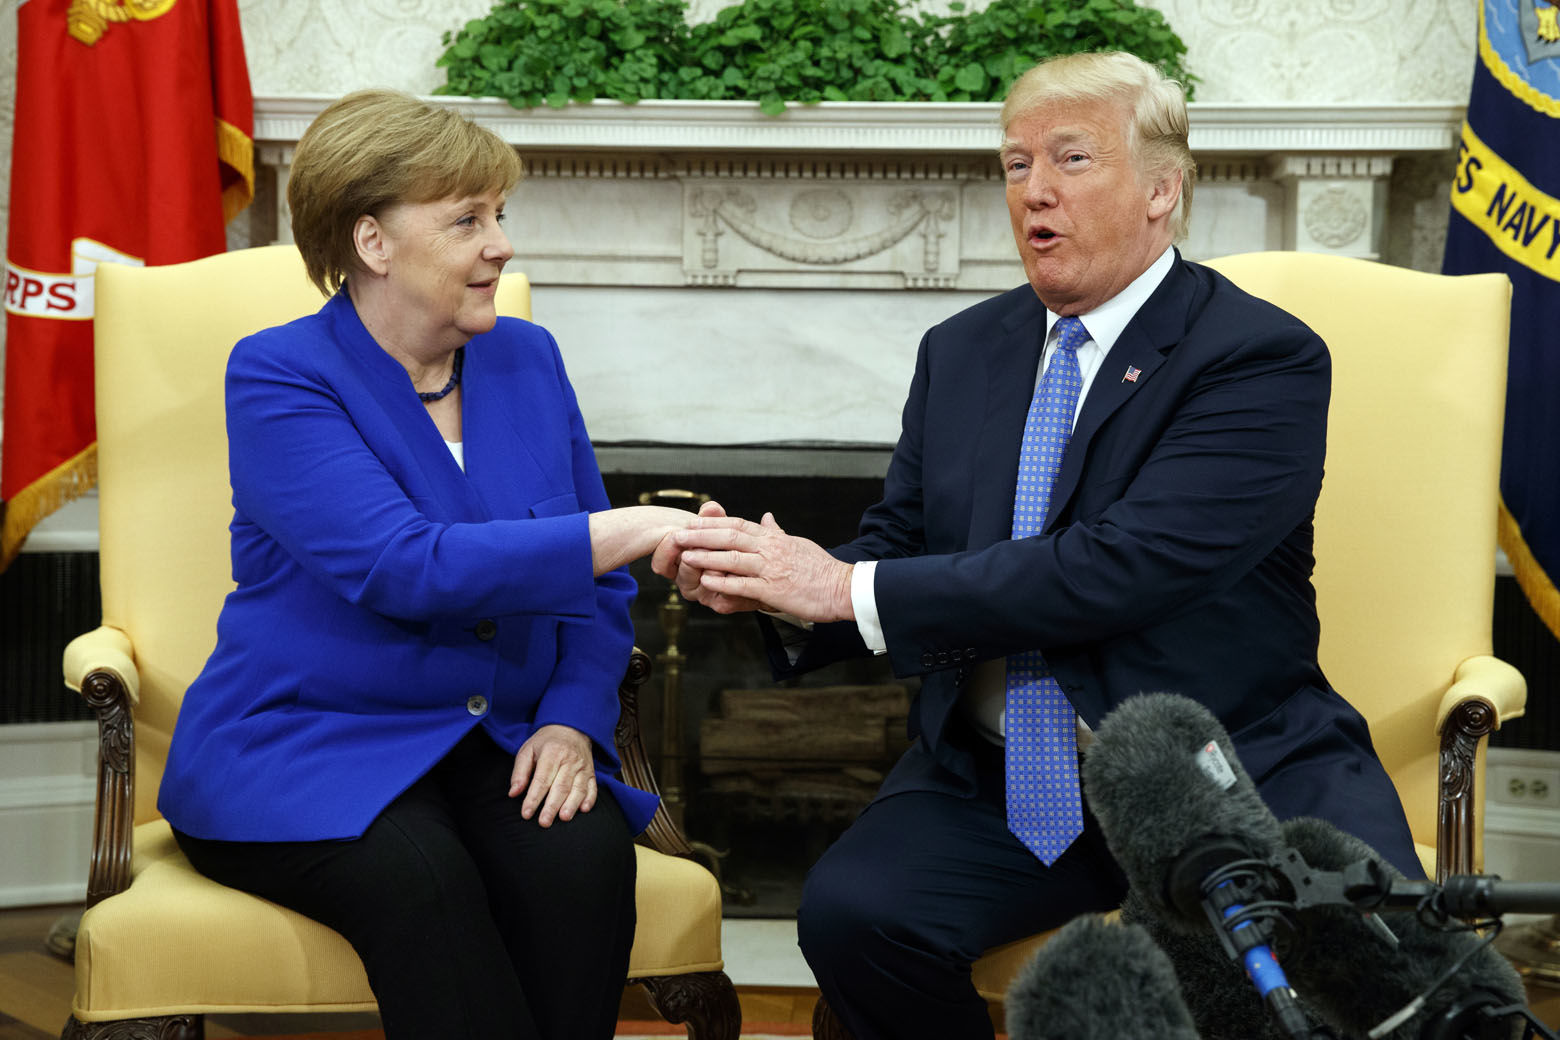 President Donald Trump meets with German Chancellor Angela Merkel in the Oval Office of the White House, Friday, April 27, 2018, in Washington. (AP Photo/Evan Vucci)